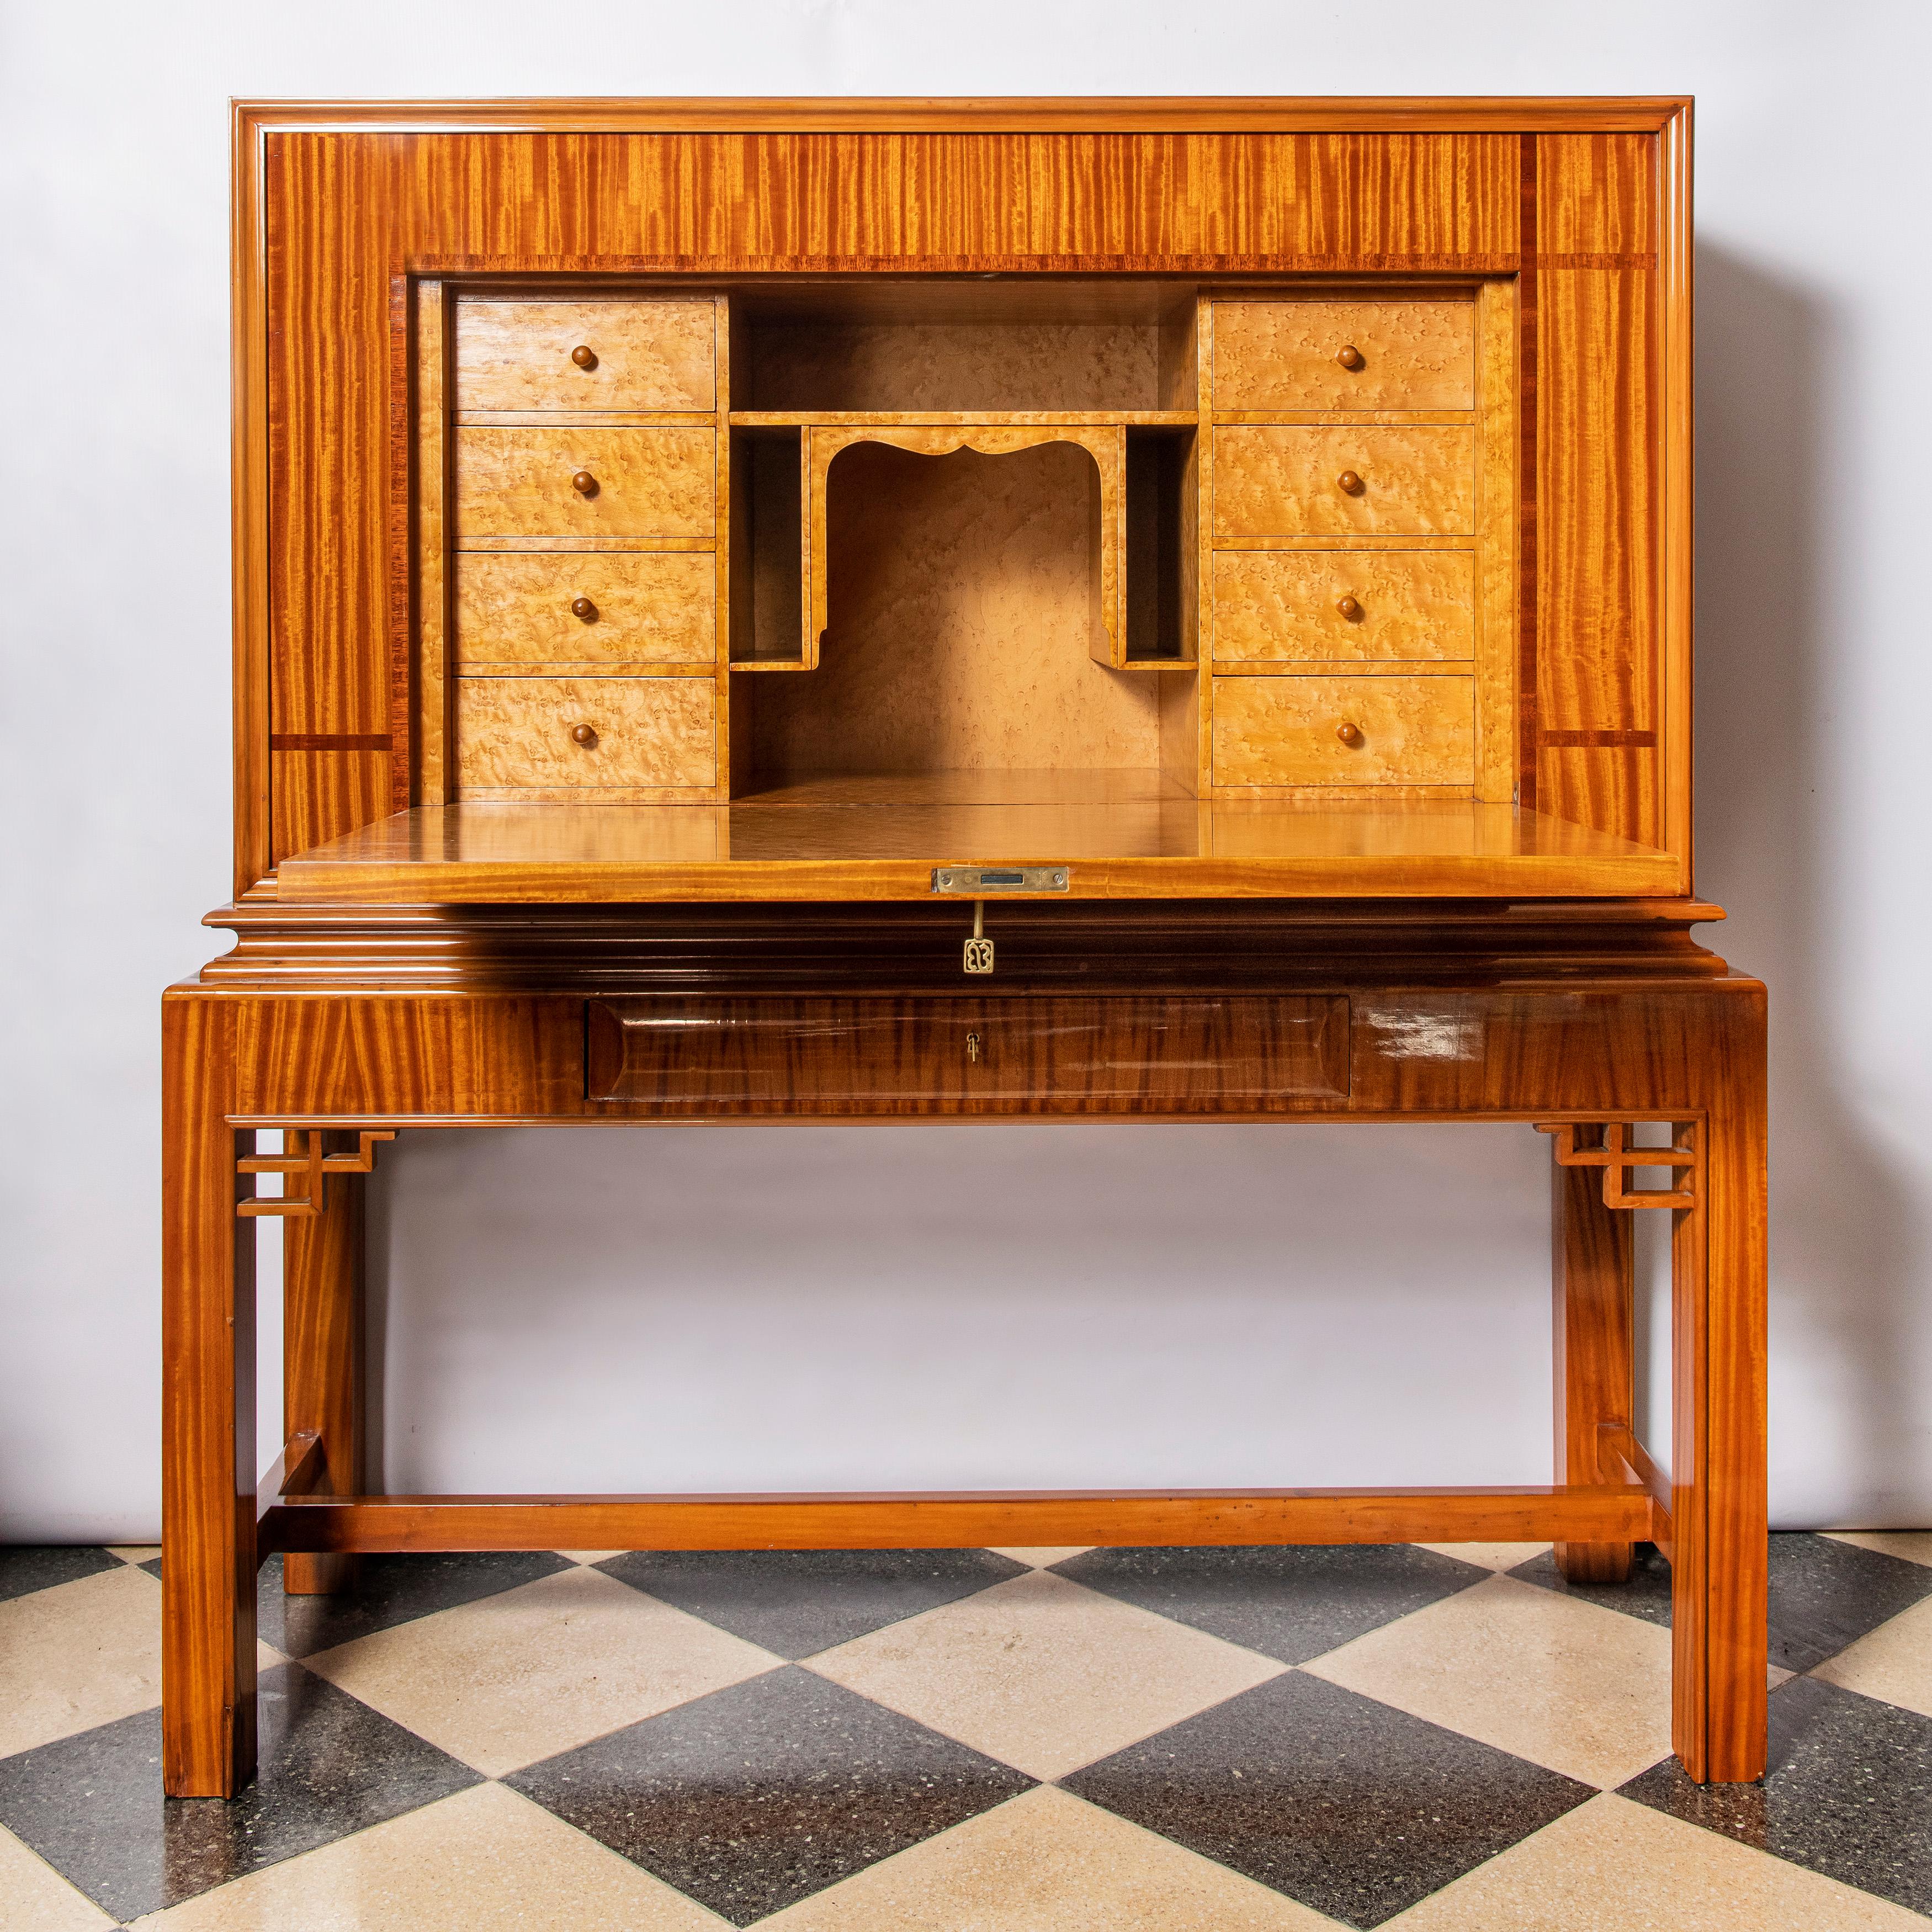 Citronnier wood and marquetry secretaire by Englander & Bonta, Argentina, 1950.
Englander & Bonta where two European designer that migrated to Buenos Aires, Argentina in 1930 and manufactured furnitures.